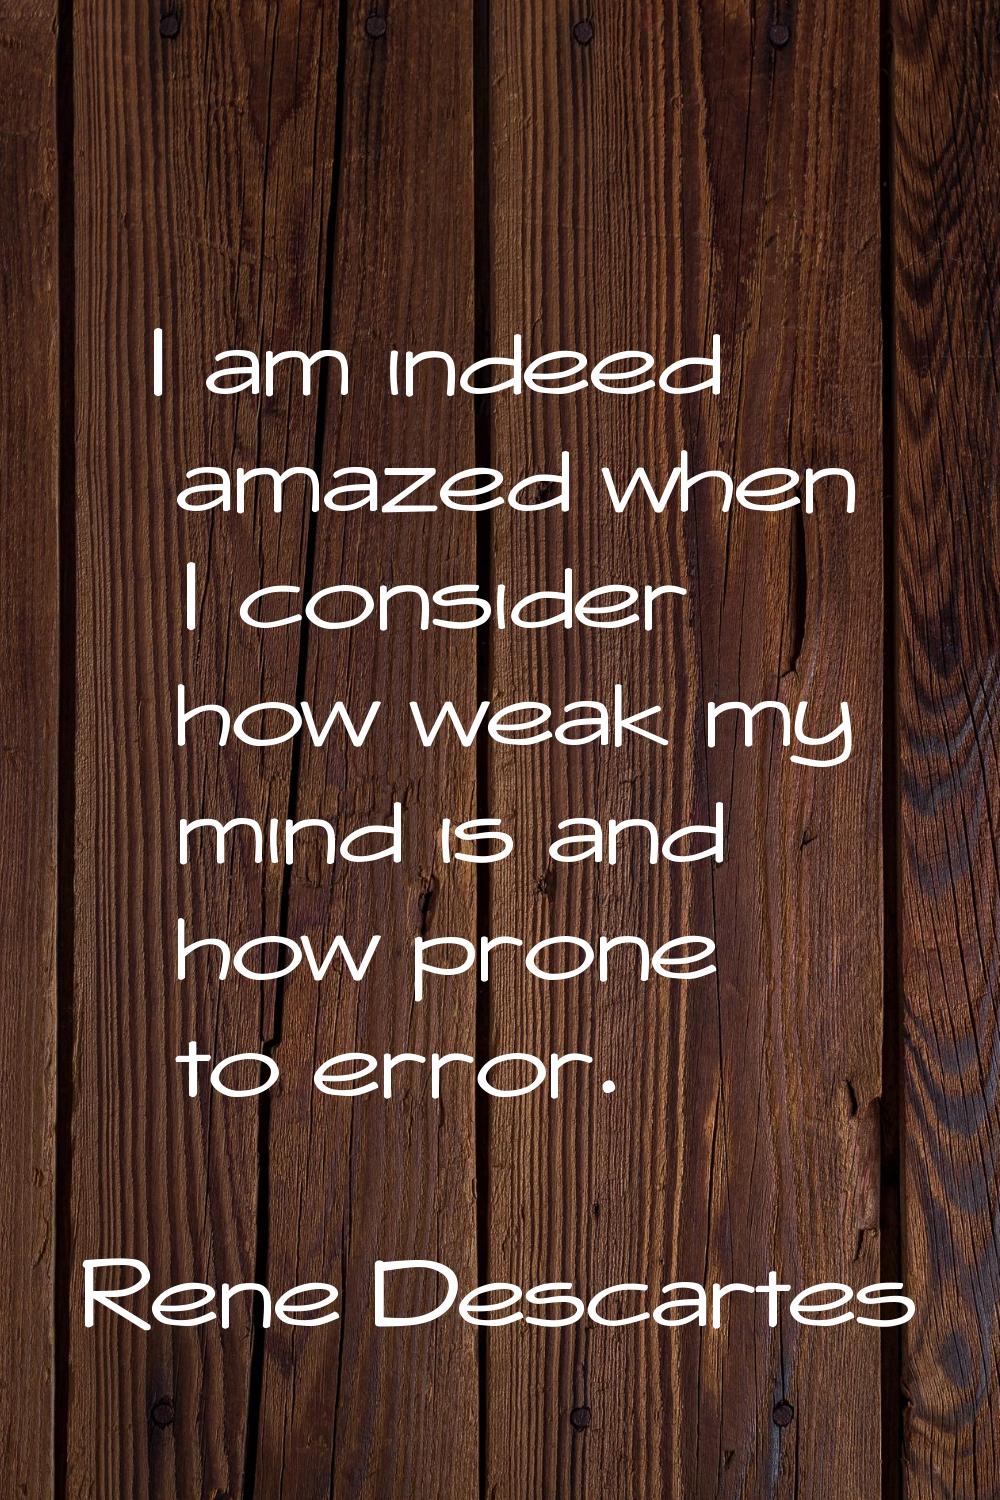 I am indeed amazed when I consider how weak my mind is and how prone to error.